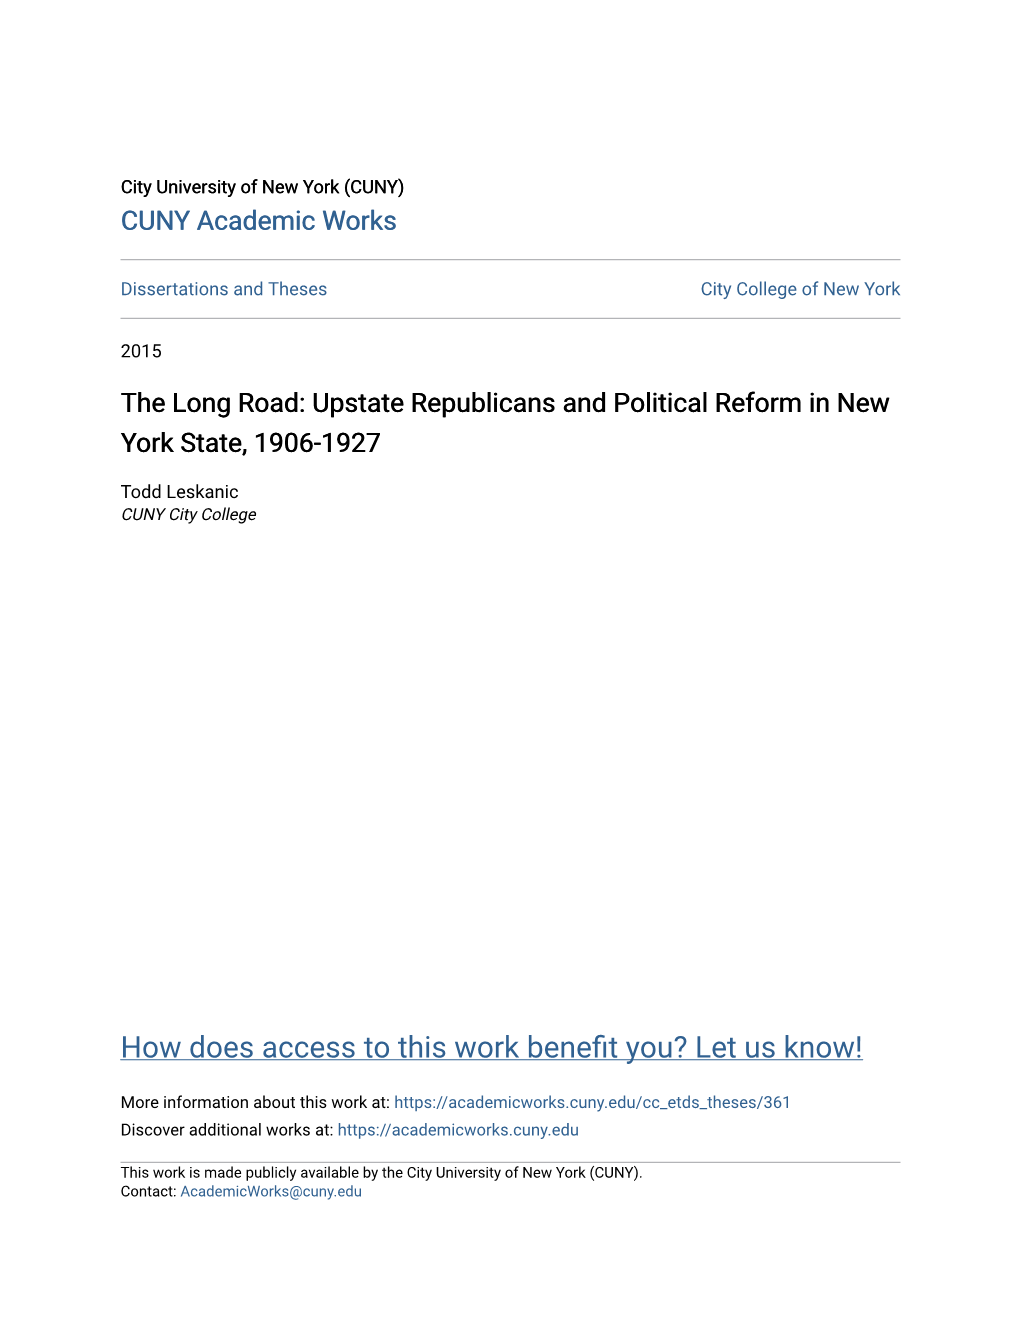 Upstate Republicans and Political Reform in New York State, 1906-1927